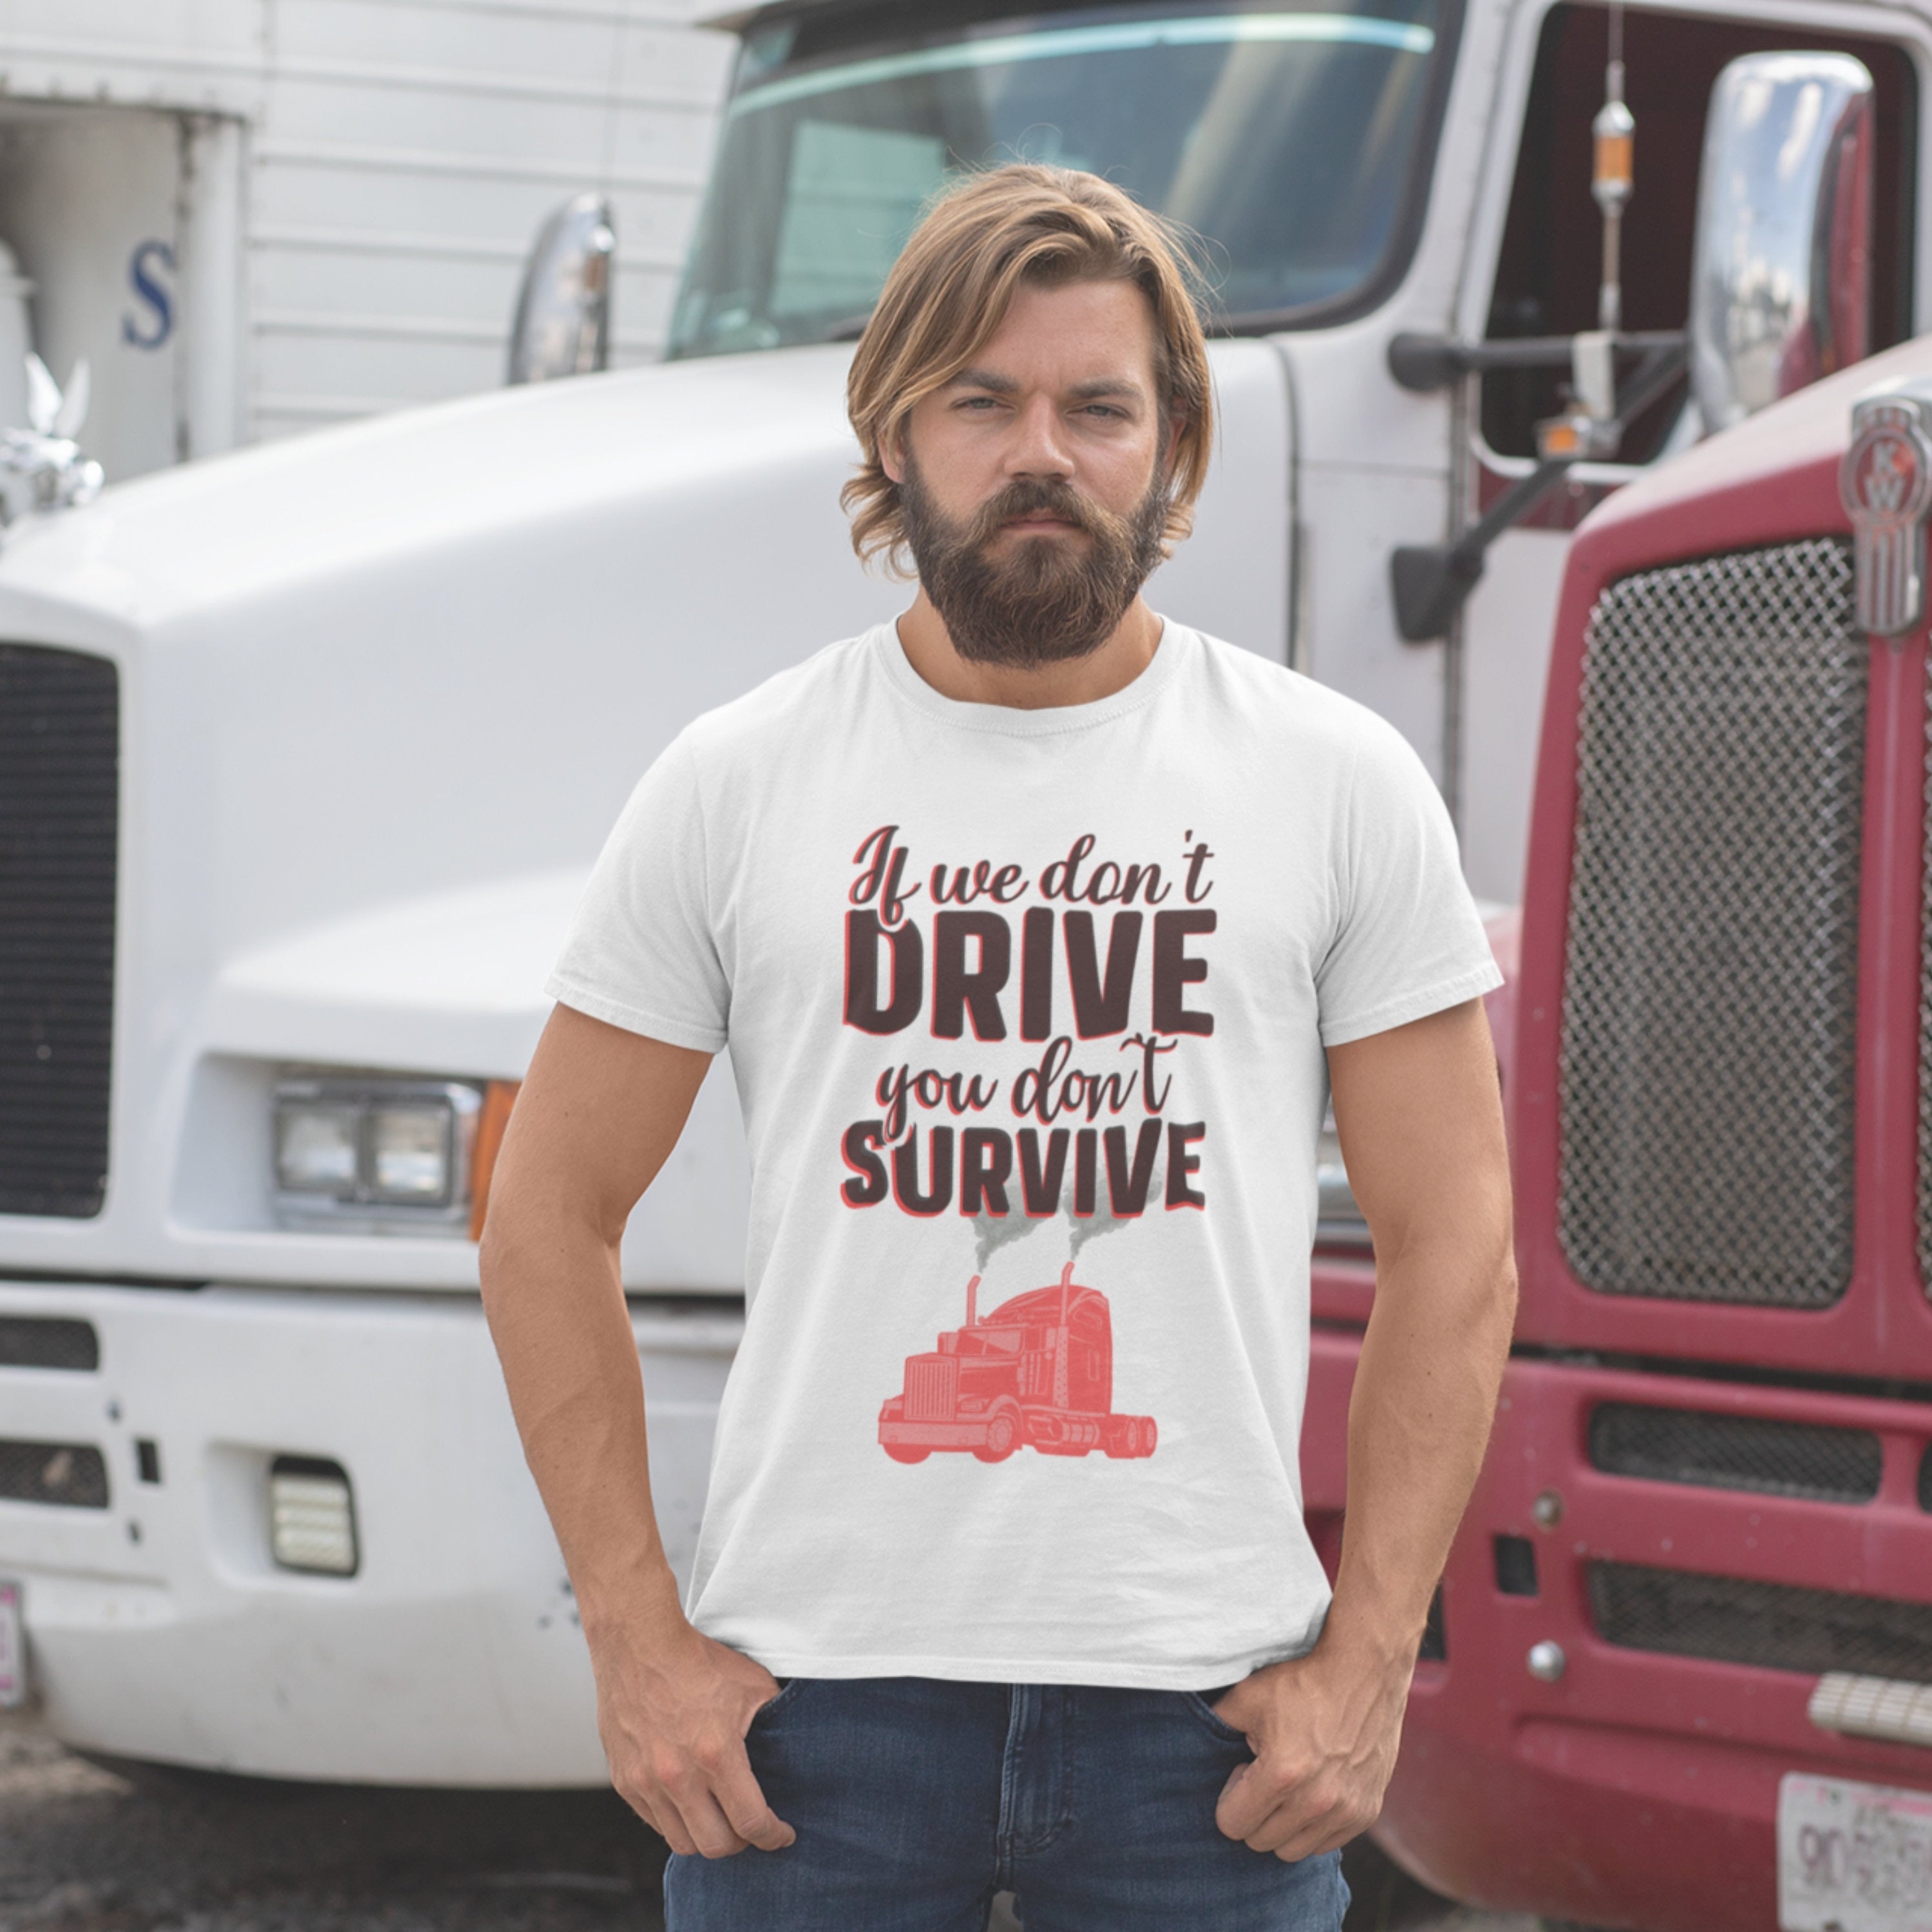 If we don't drive you don't survive trucker shirt, semi truck